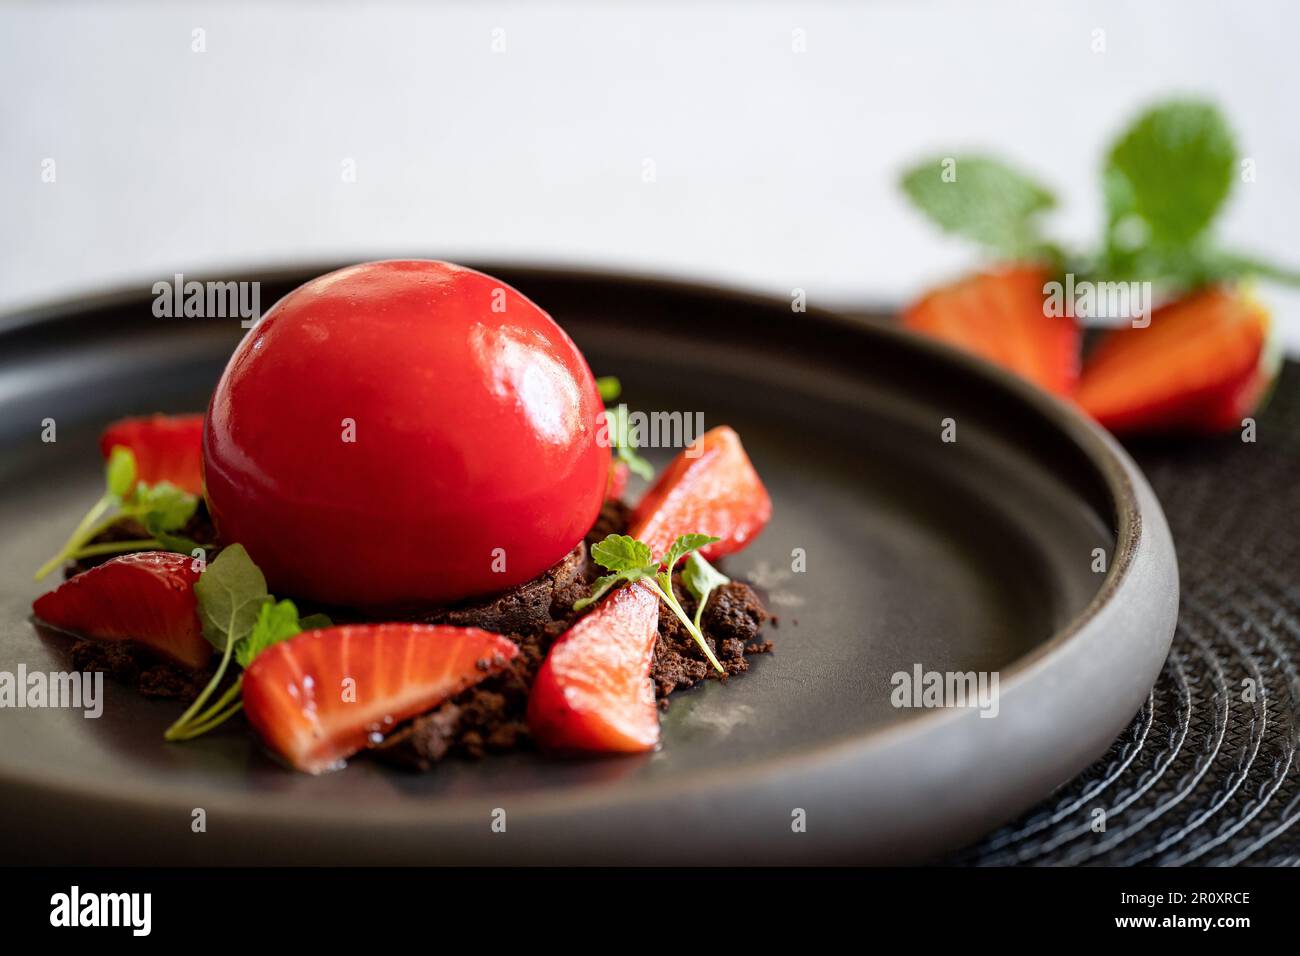 Selective focus of a sphere curd cake with strawberries and brownie. Dessert with smooth surfaces and mirror glaze. Red dessert on the black plate. Stock Photo